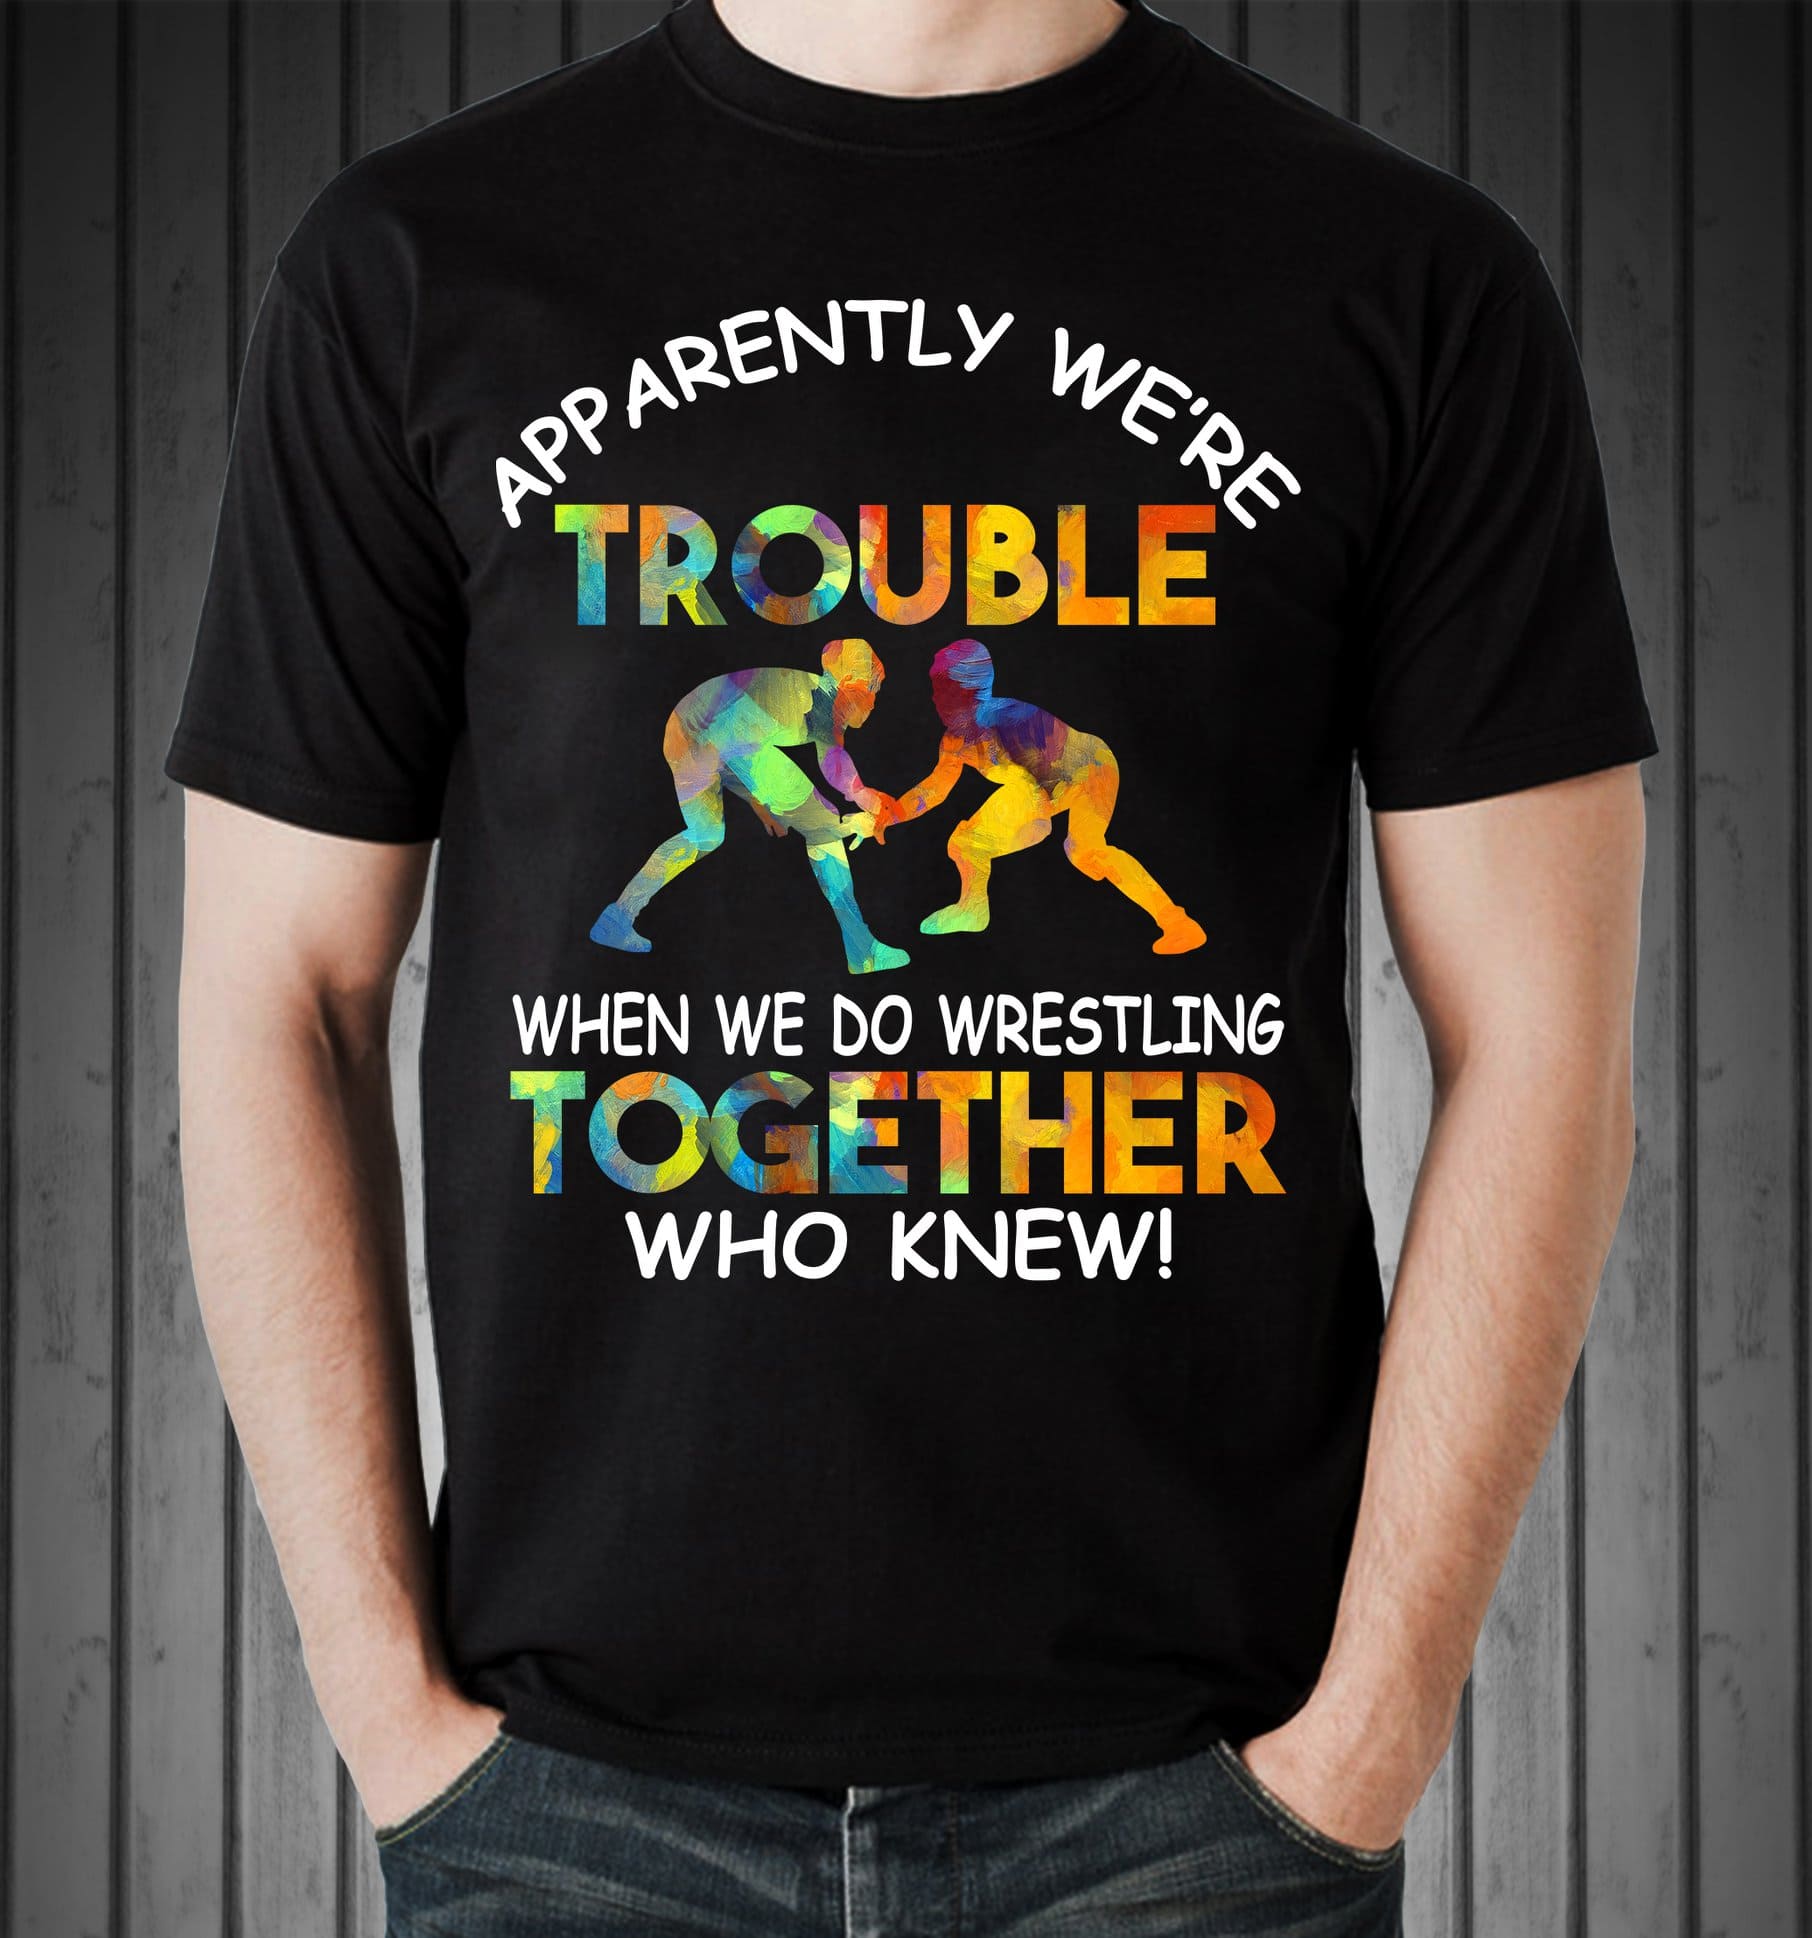 Apparently we're trouble when we do wrestling together - Wrest training, gift for professional wrestler